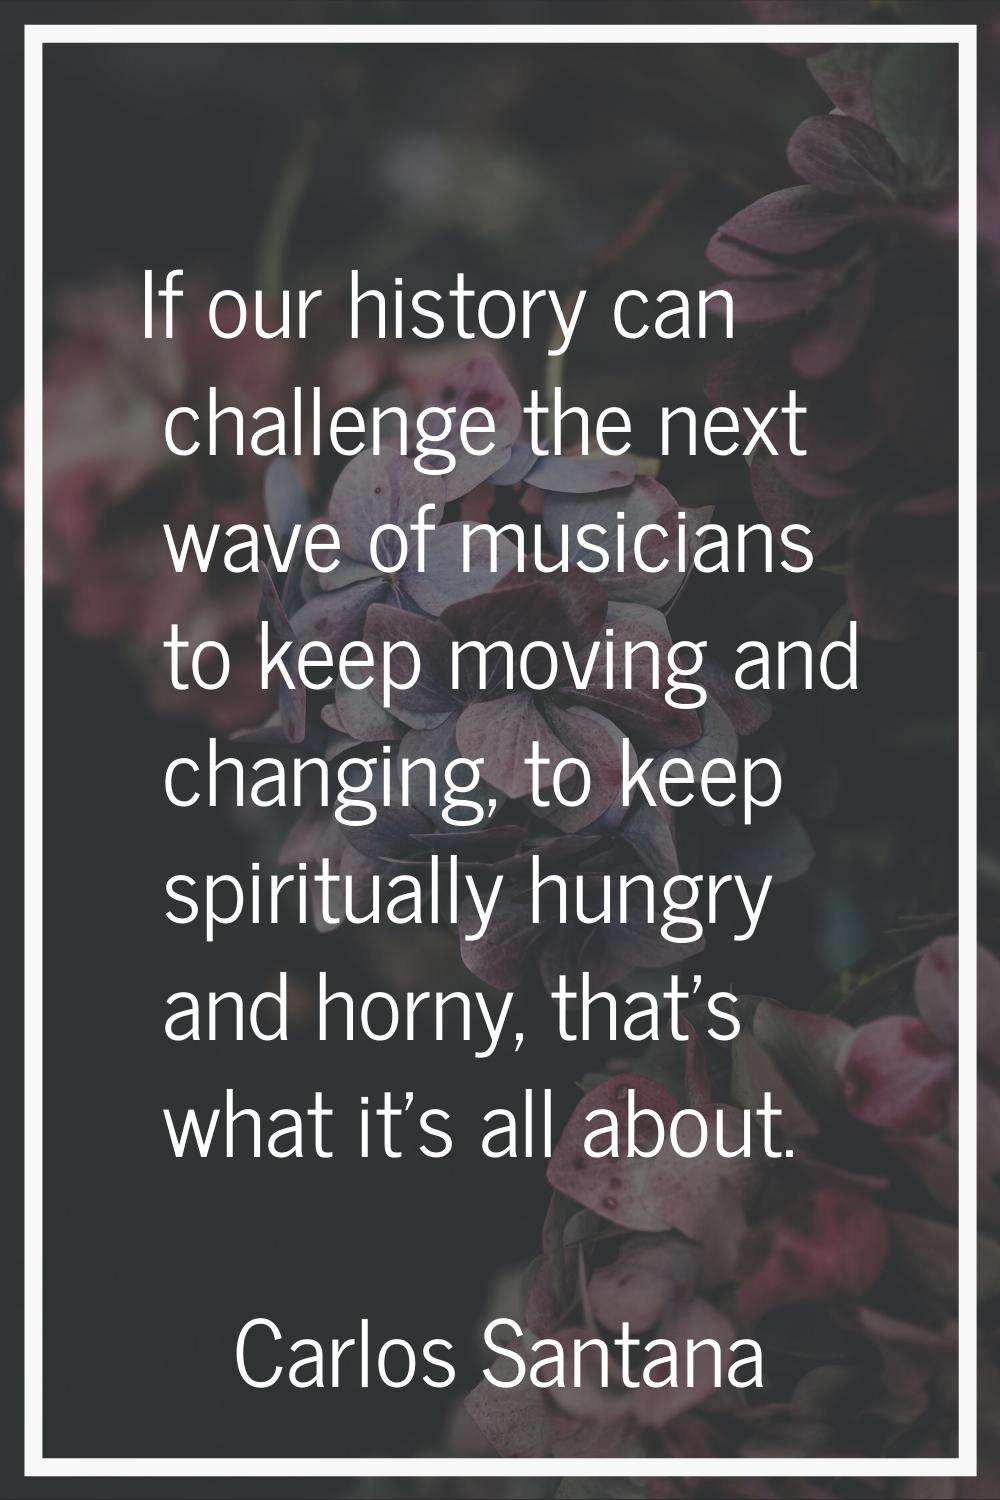 If our history can challenge the next wave of musicians to keep moving and changing, to keep spirit